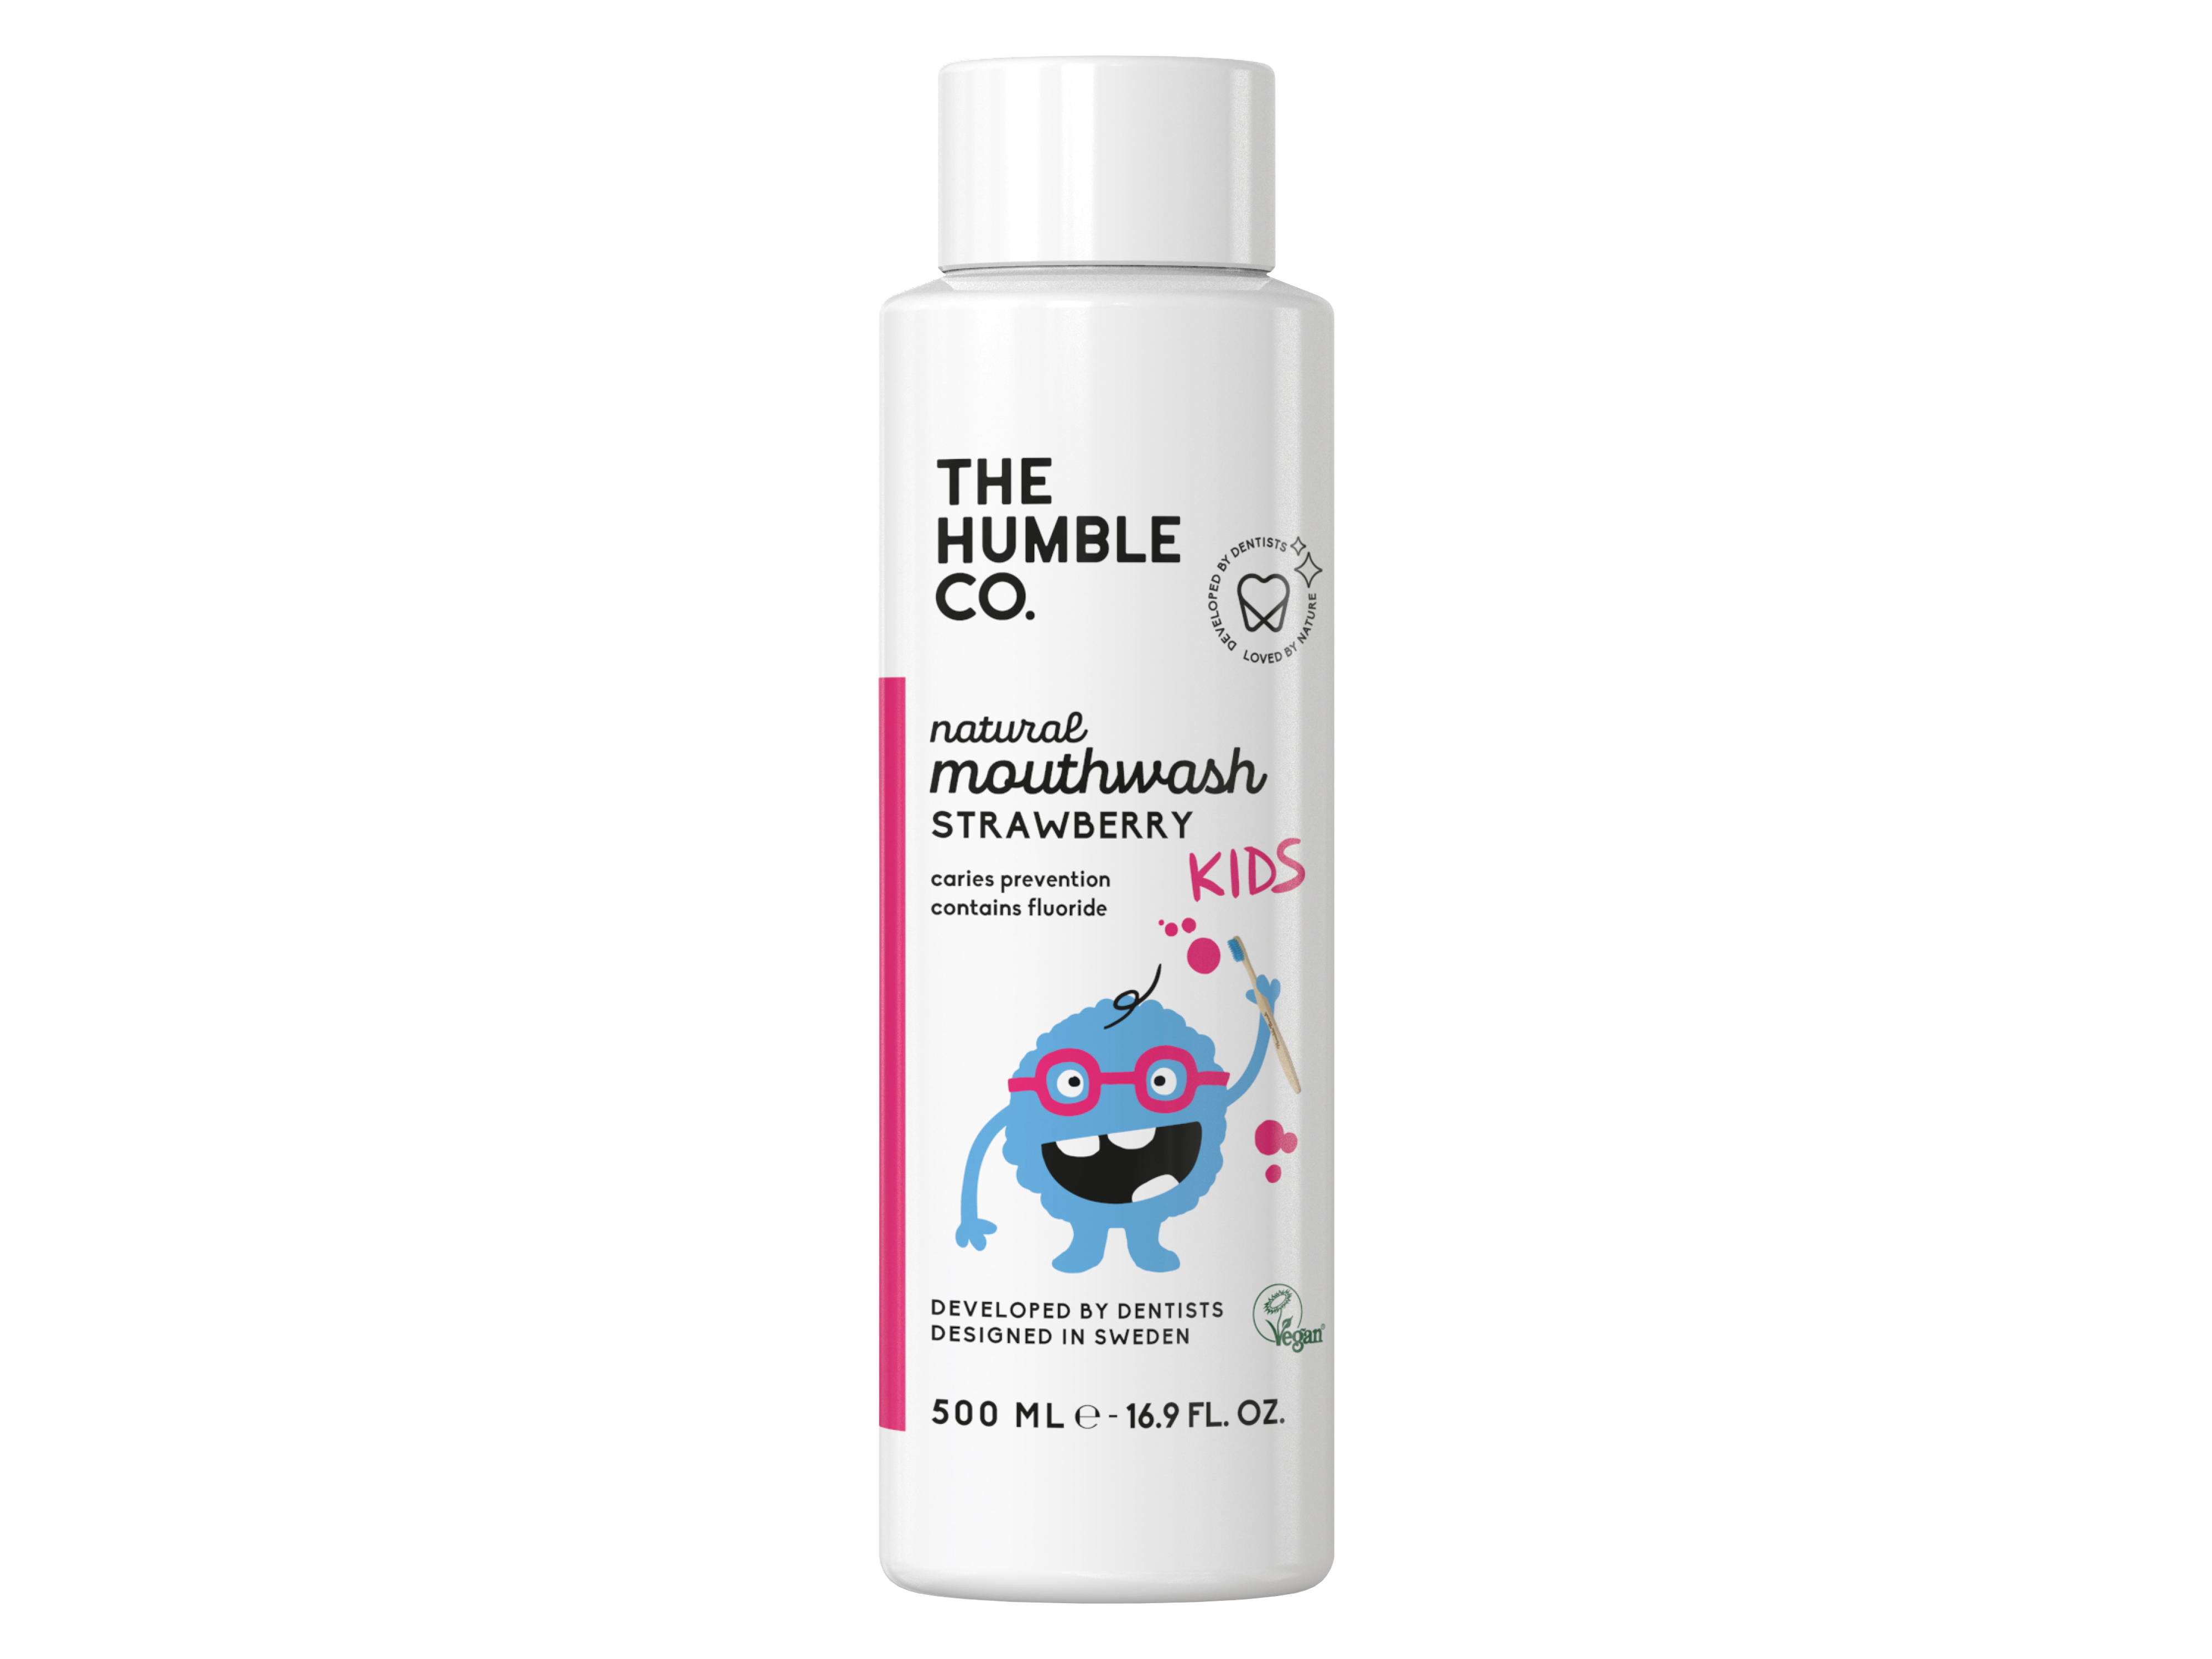 The Humble Co. Natural Mouthwash Kids Strawberry, 500 ml